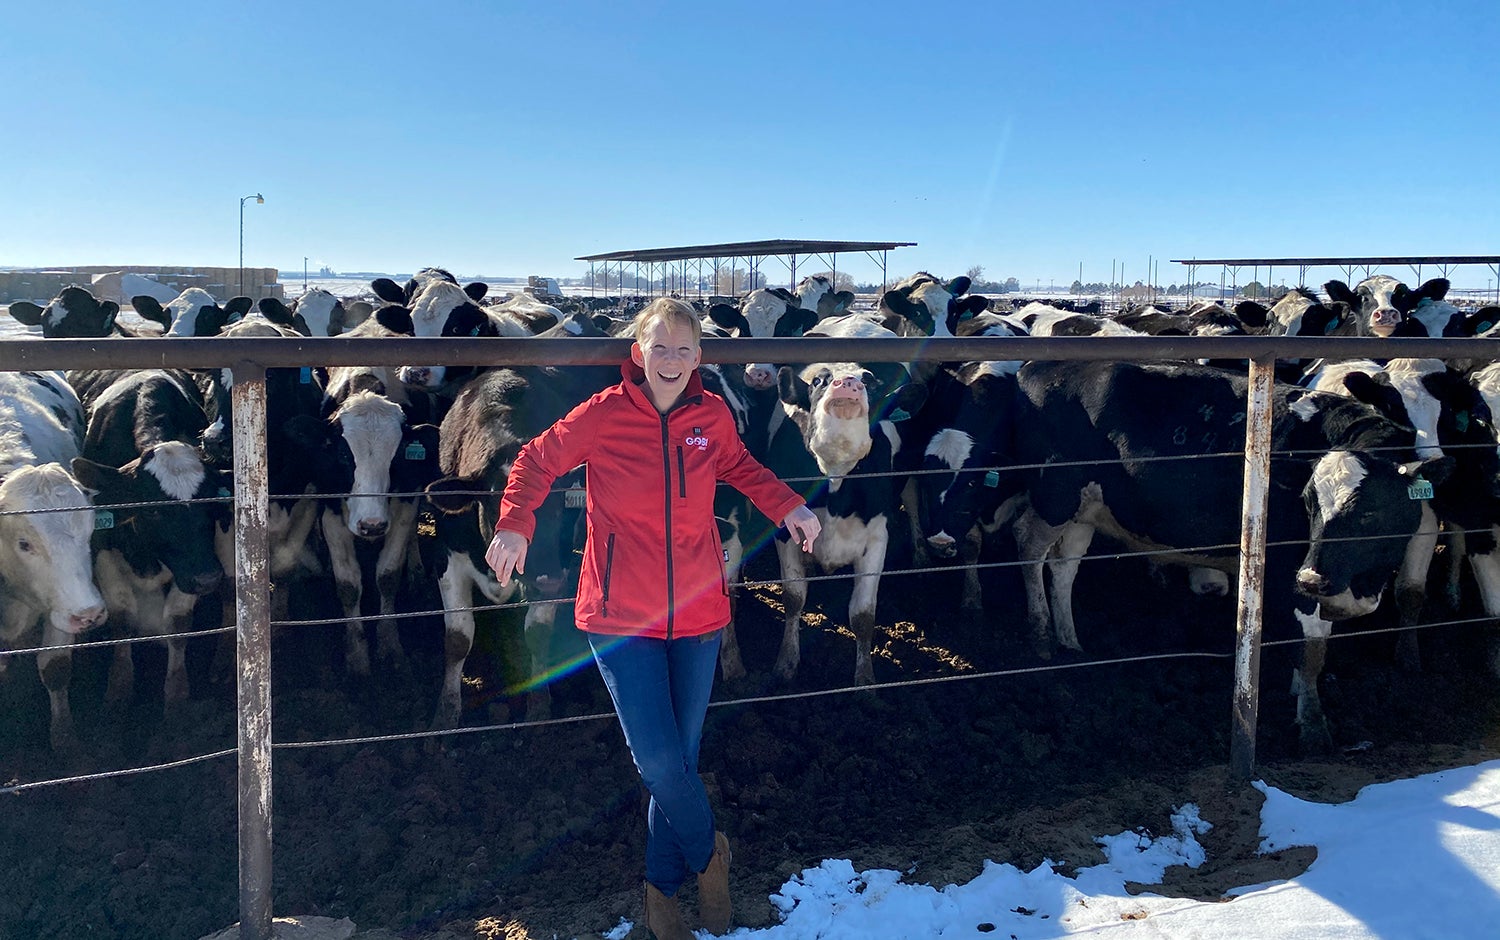 Women in red jacket poses in front of a herd of cows